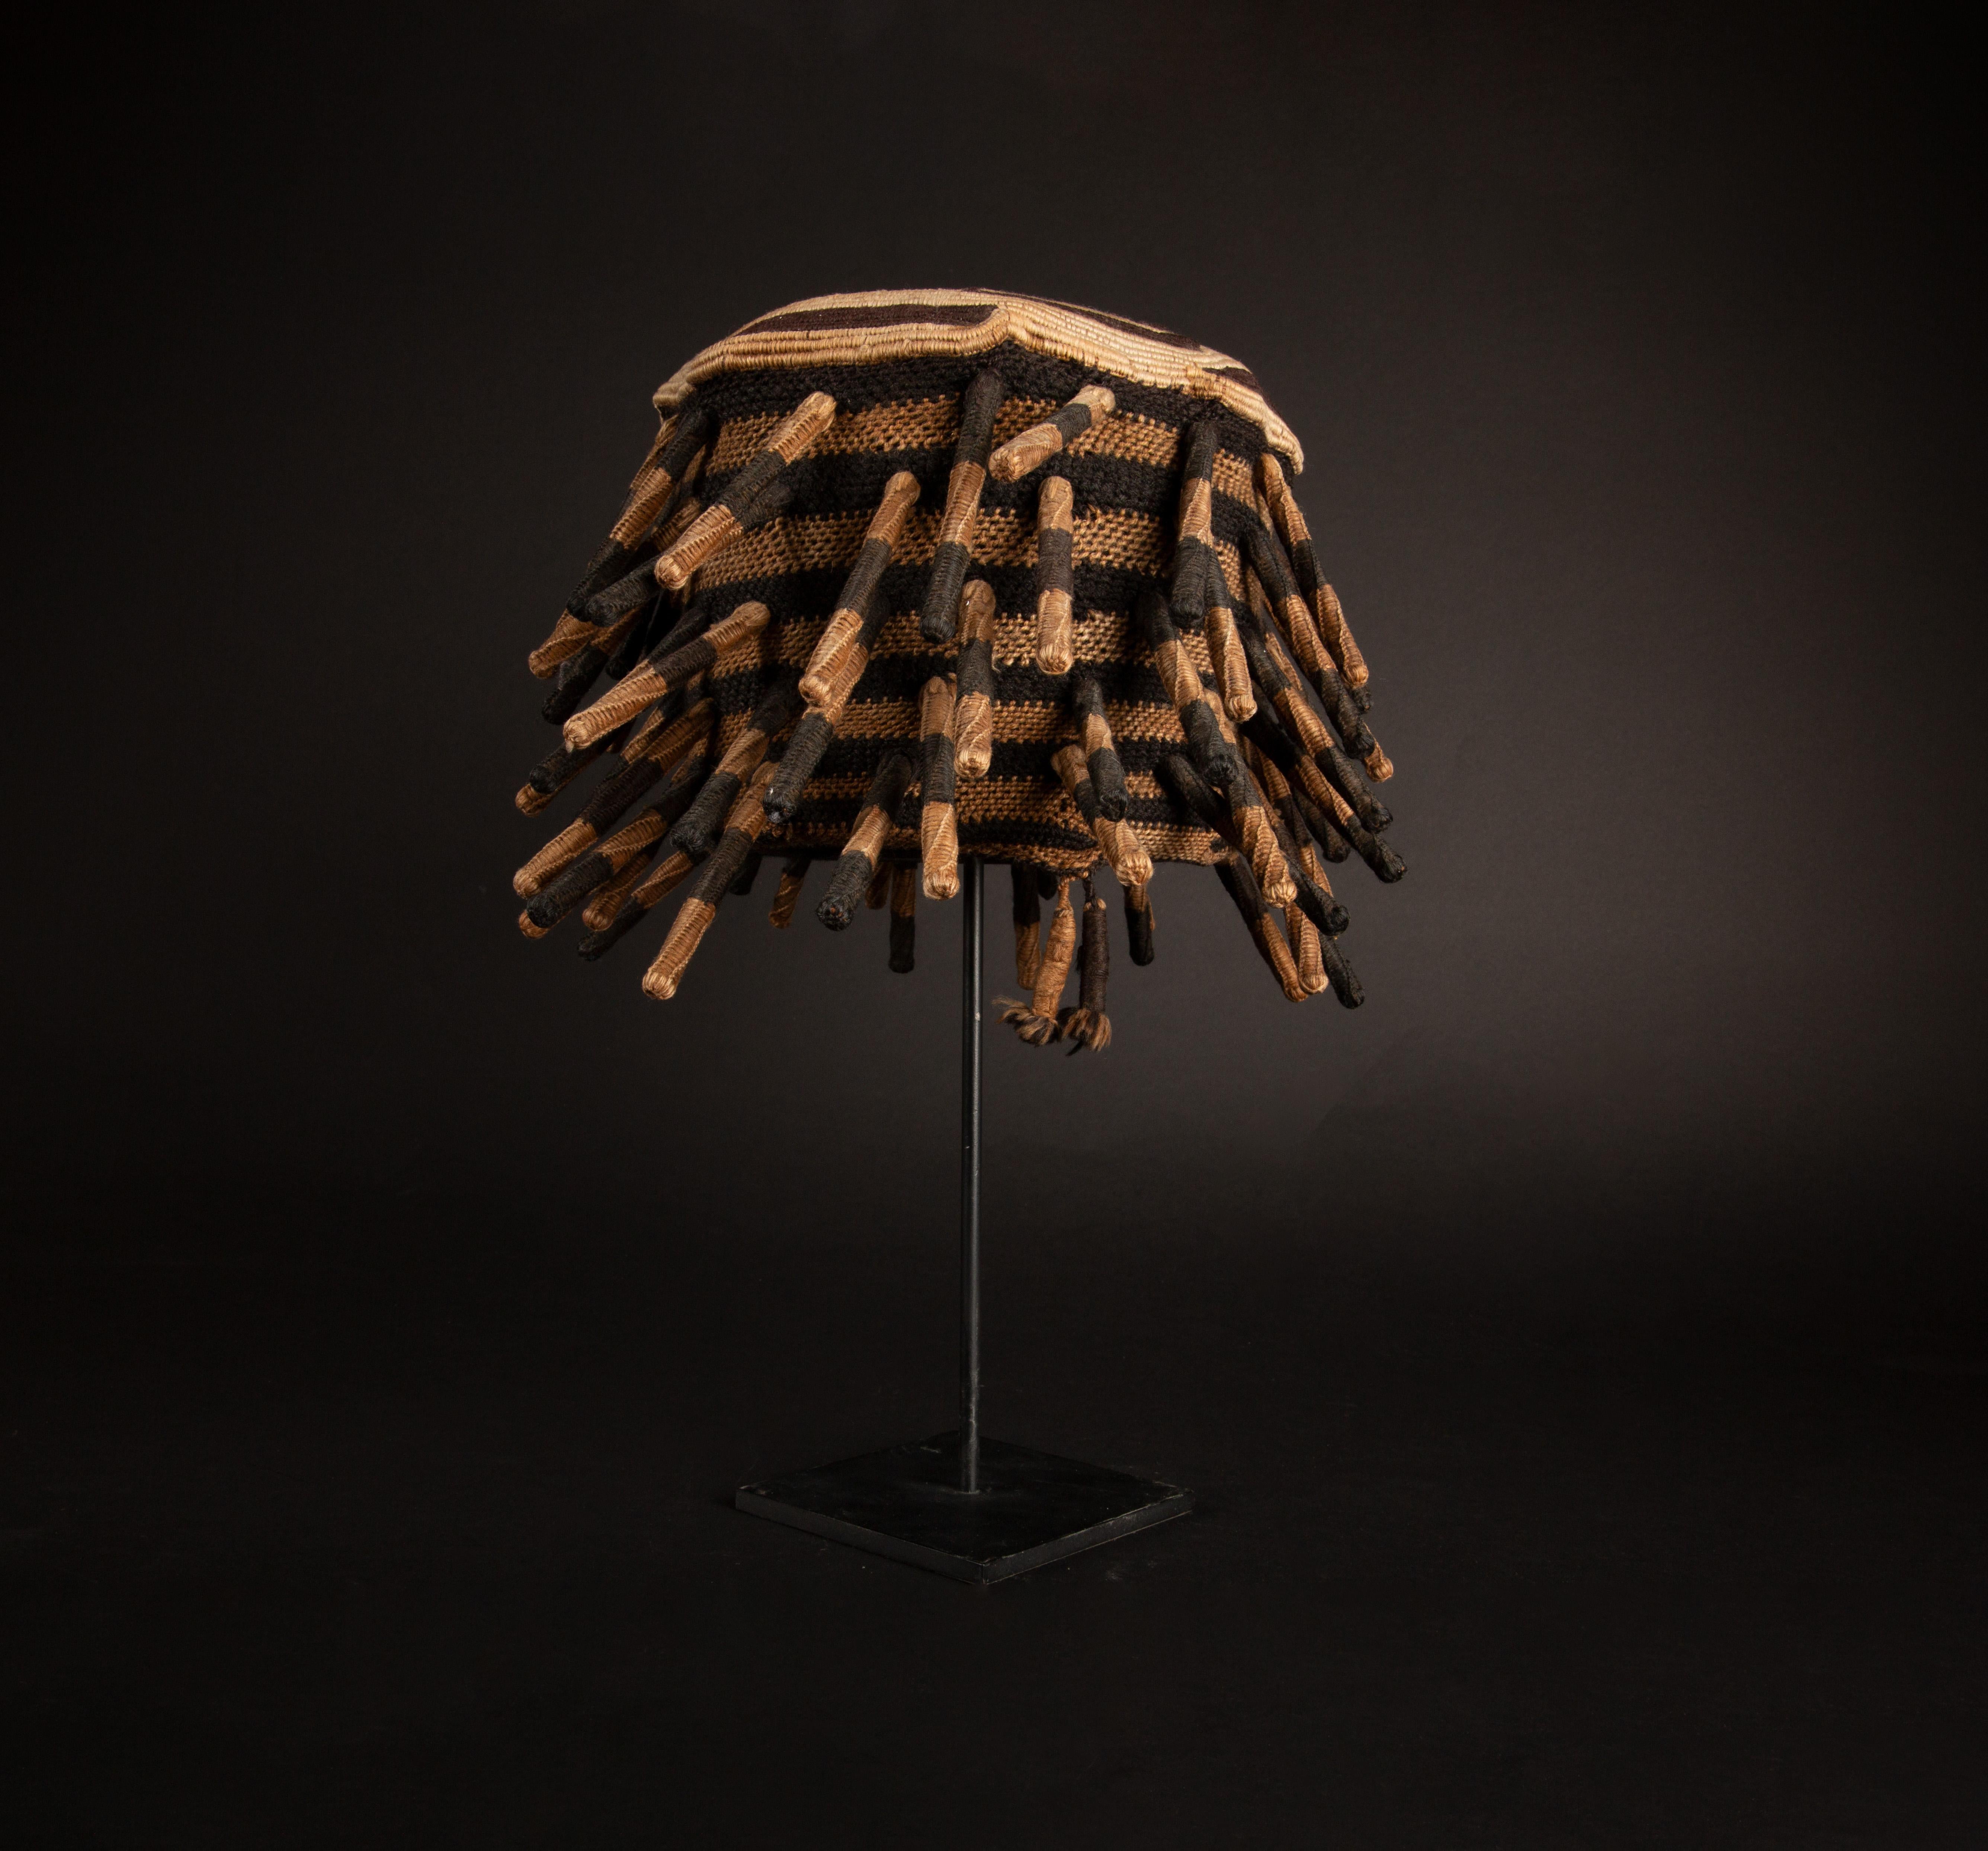 Adorned with spiked braids, this prestigious custom mounted Ashetu hat embodies the cultural significance of the Bamum and Bamileke people of Cameroon, Central Africa, who revered the human head as the vessel of one's spirit and intellect. In their